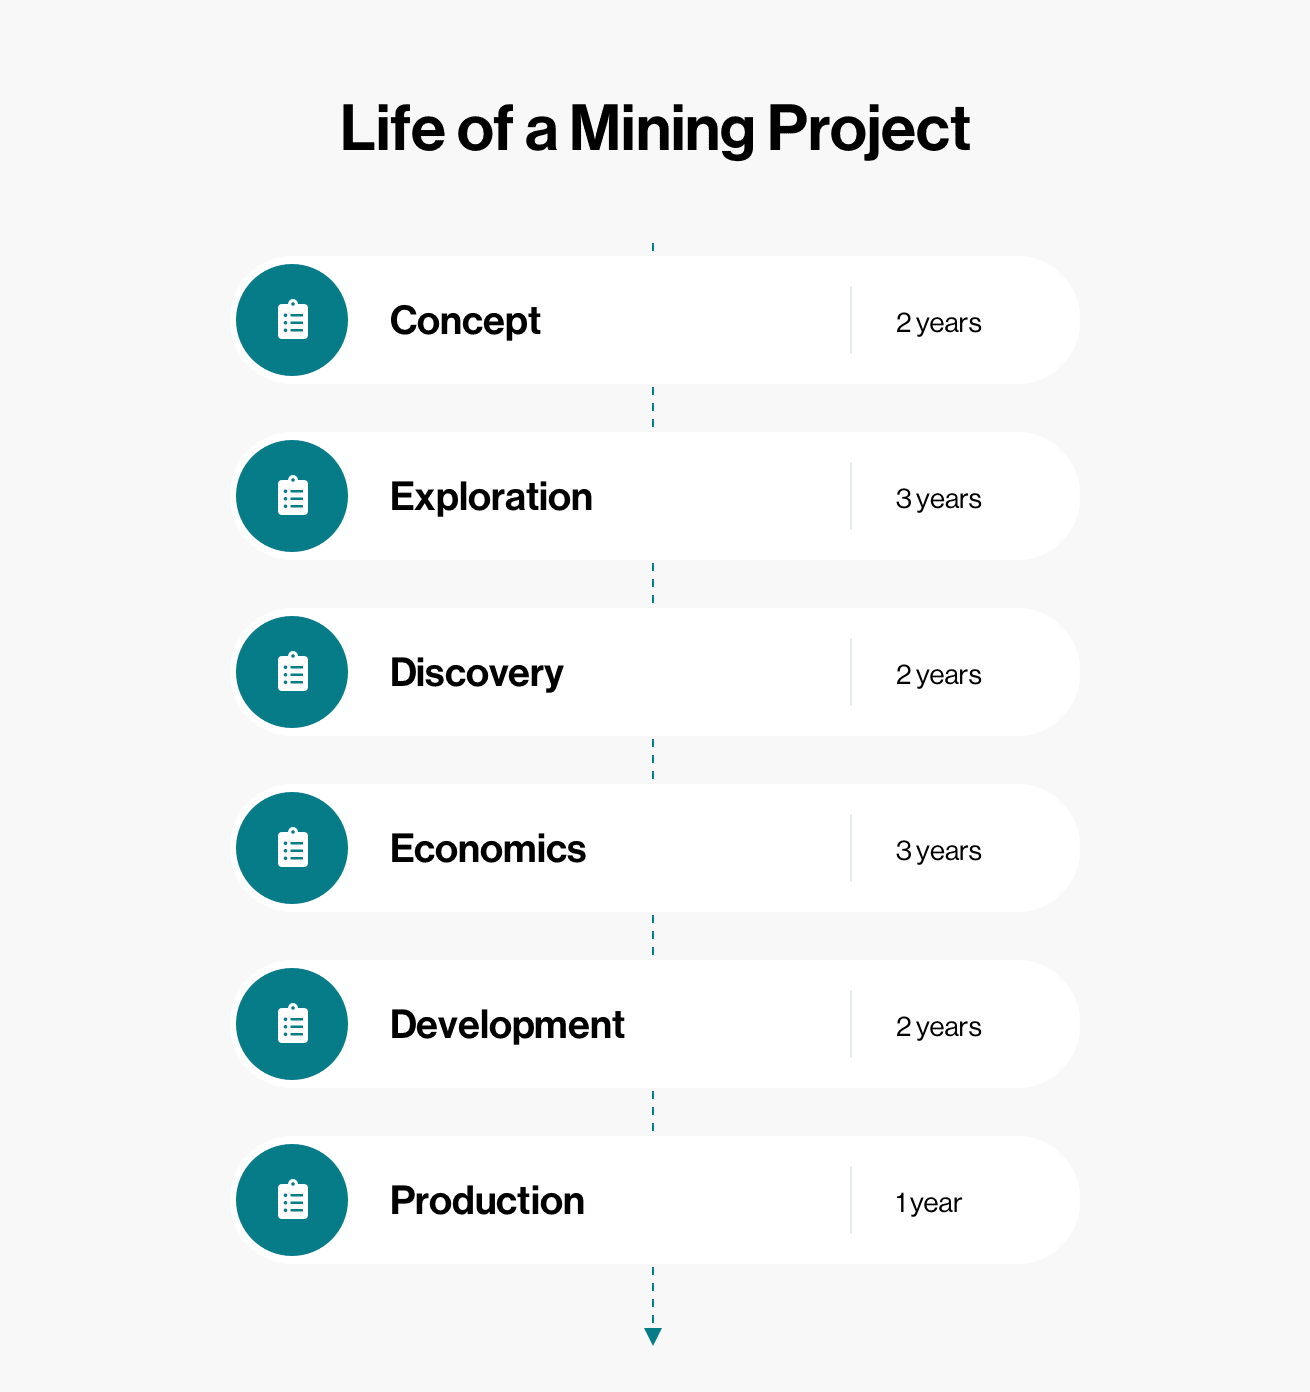 Life of mining project